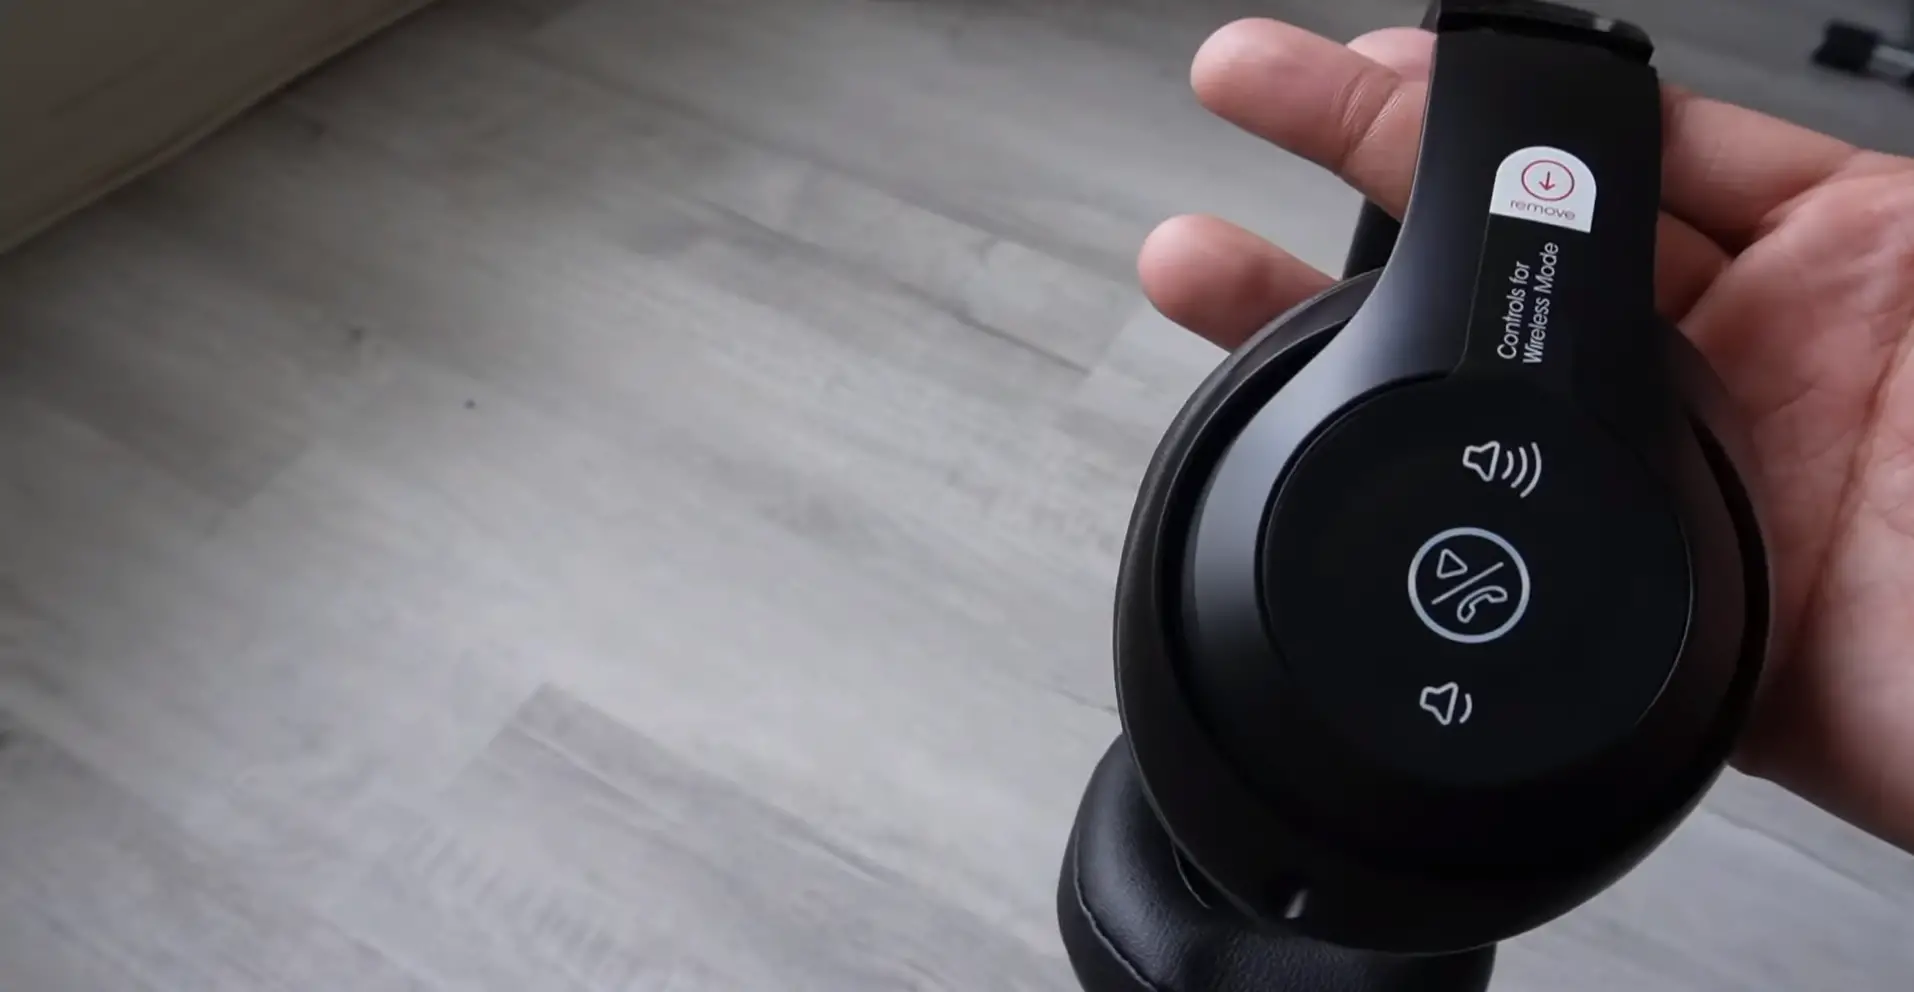 What Are the Features of the Beats Studio 3 Headphones?